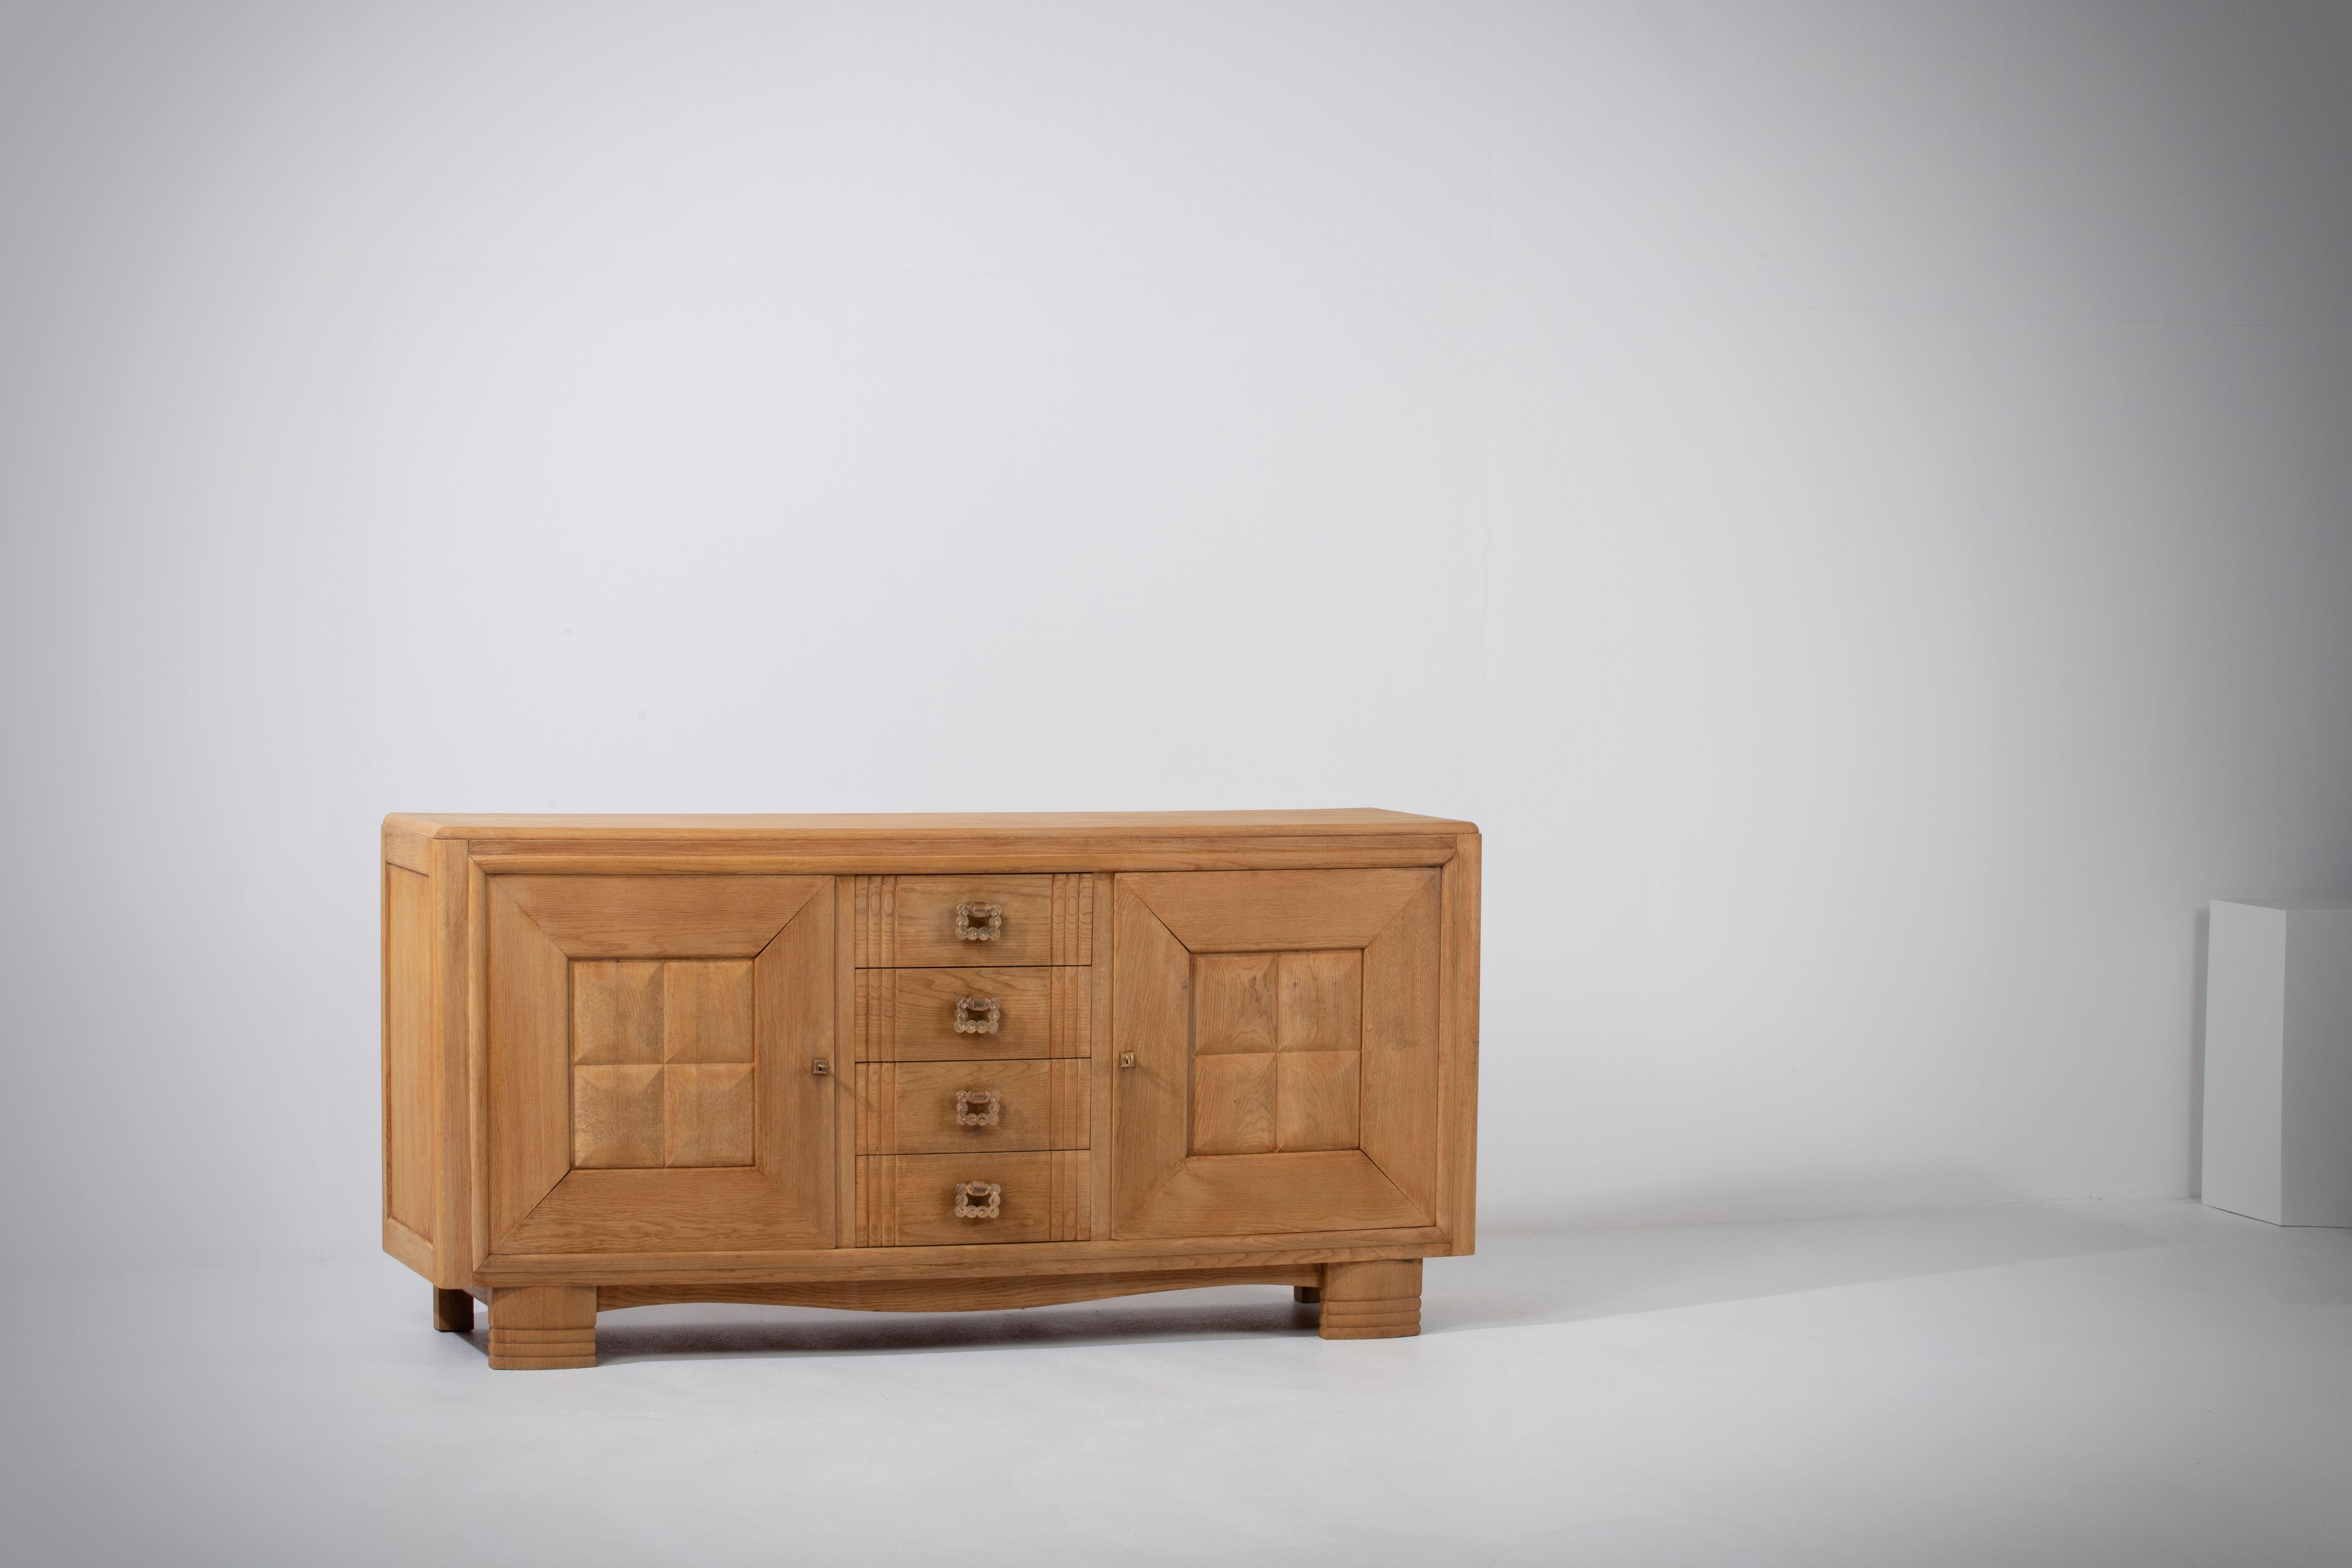 Introducing an exquisite sideboard crafted from natural oak, showcasing the beauty of its rich and warm tones. This remarkable piece exudes elegance and sophistication, reflecting the meticulous French craftsmanship that went into its